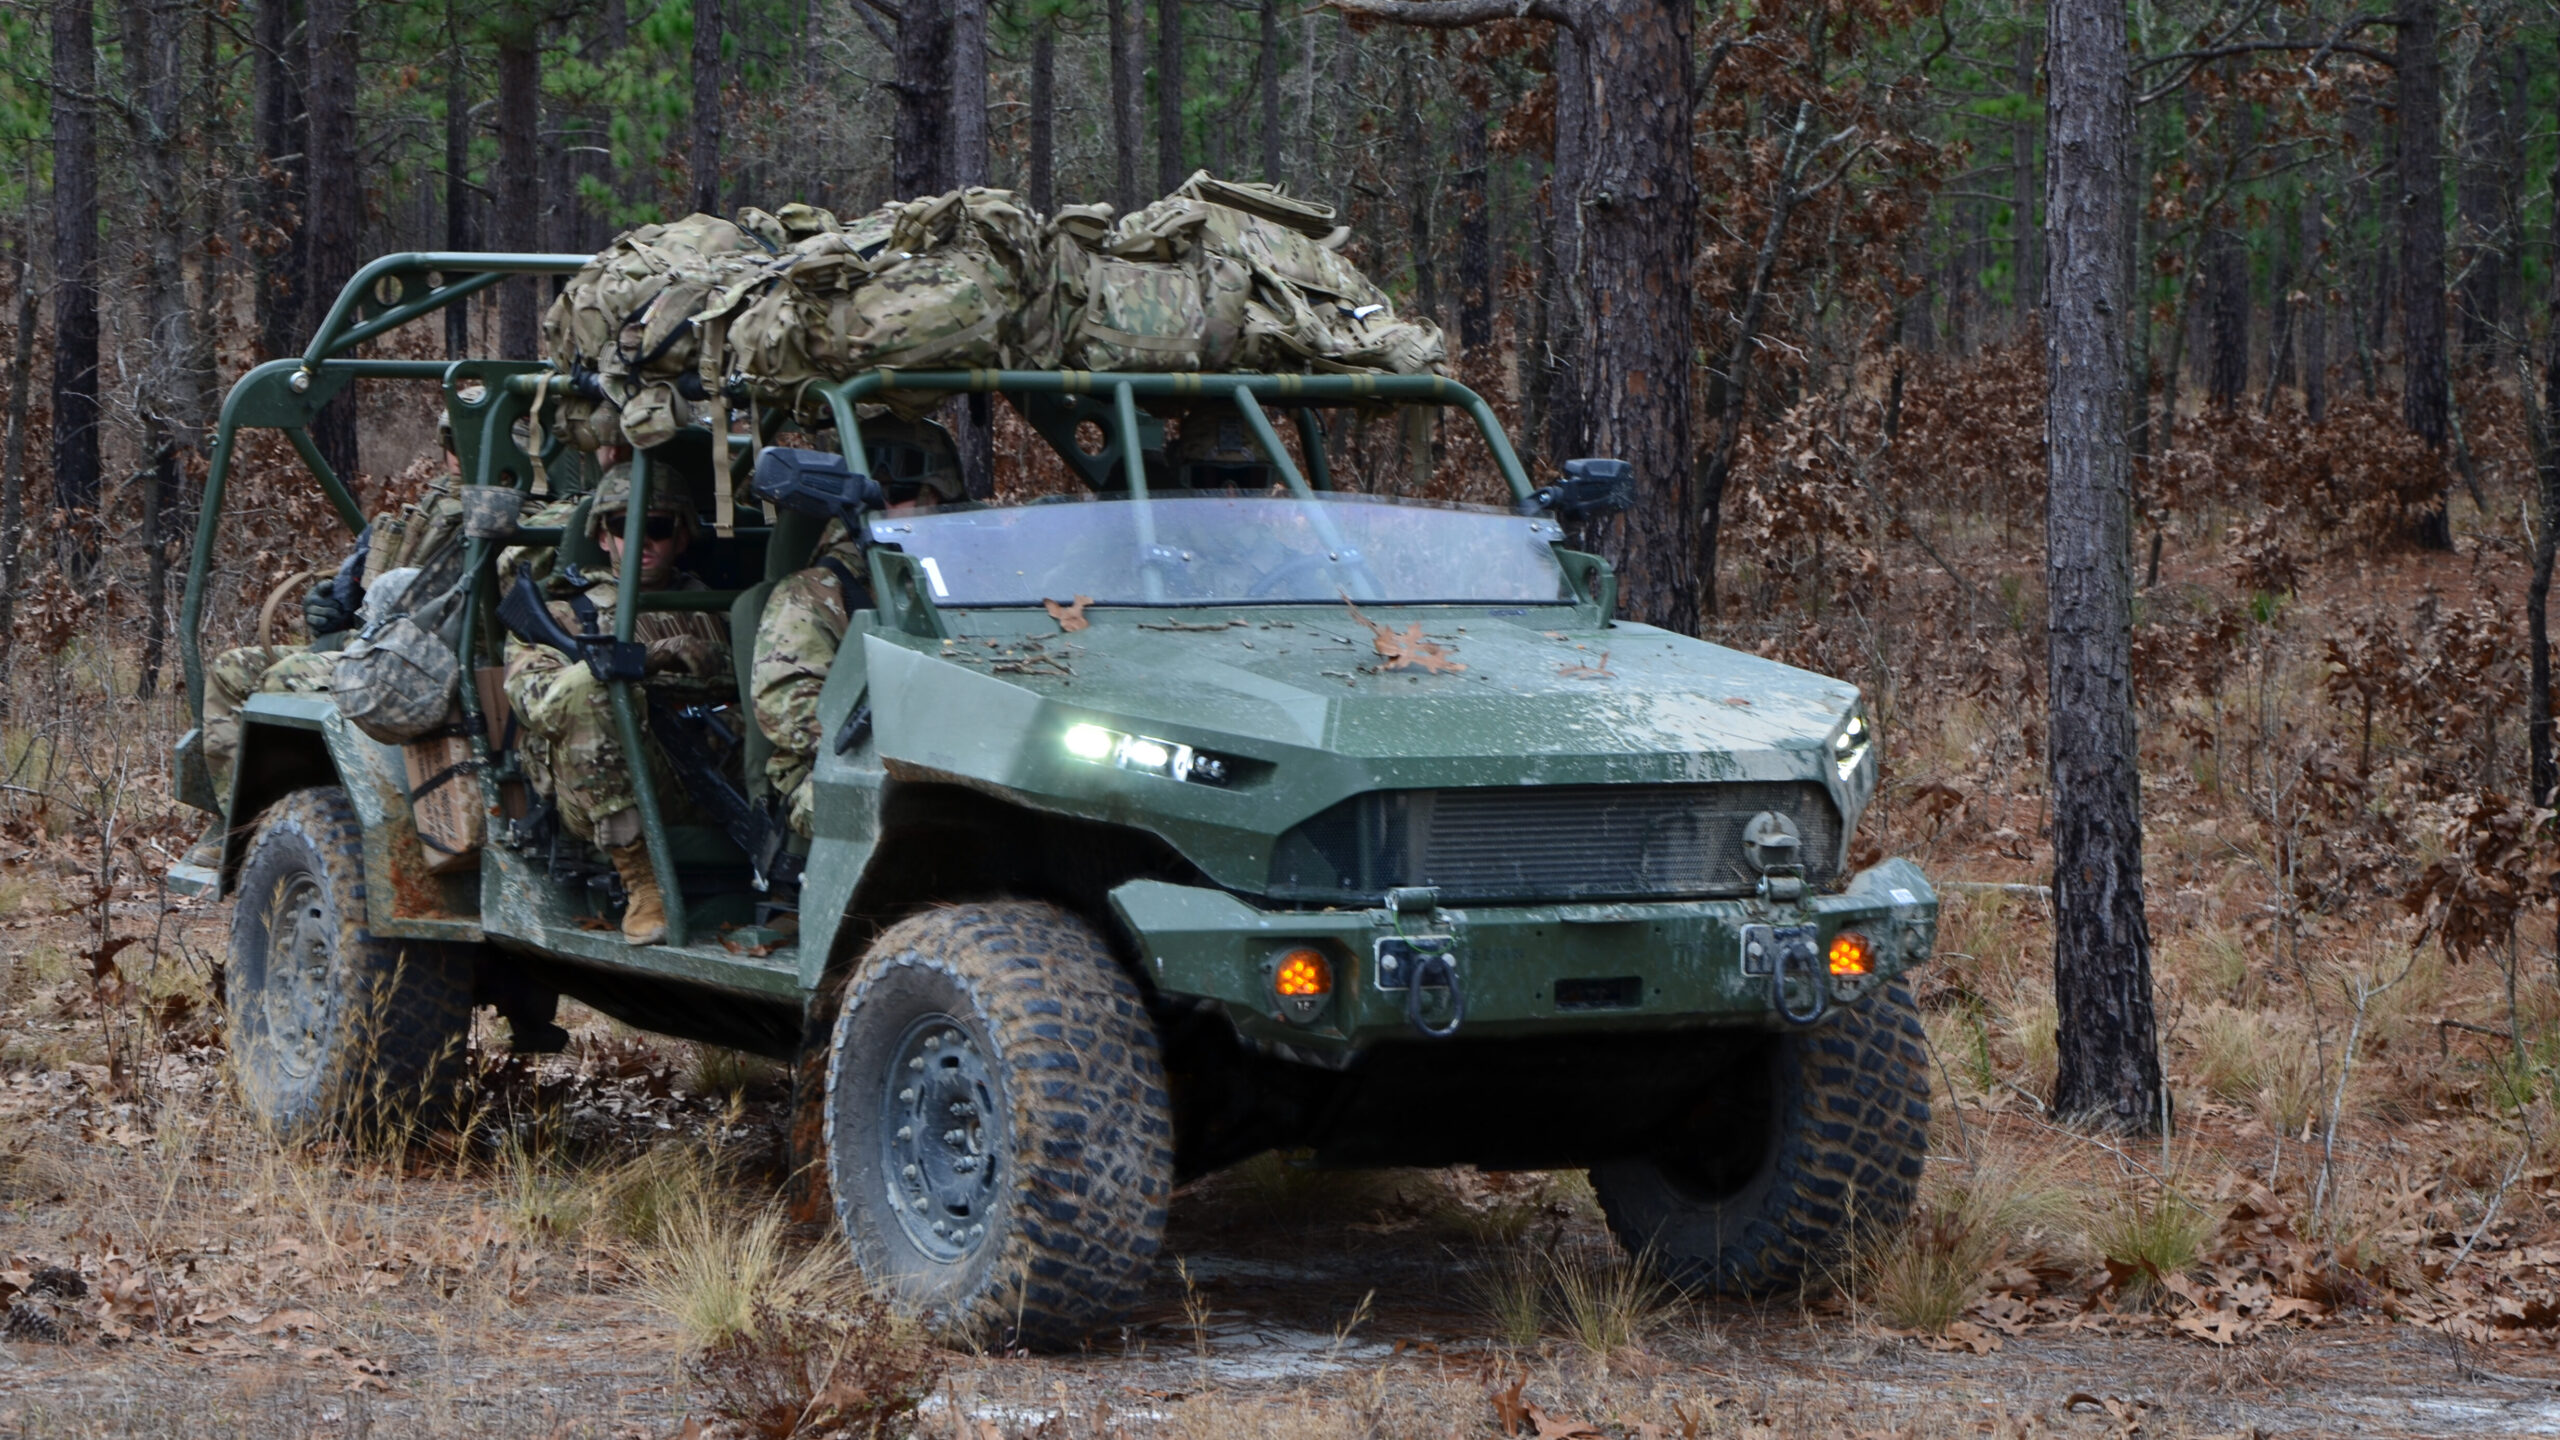 Manufacturing Tactical Vehicles On A World-Class Level